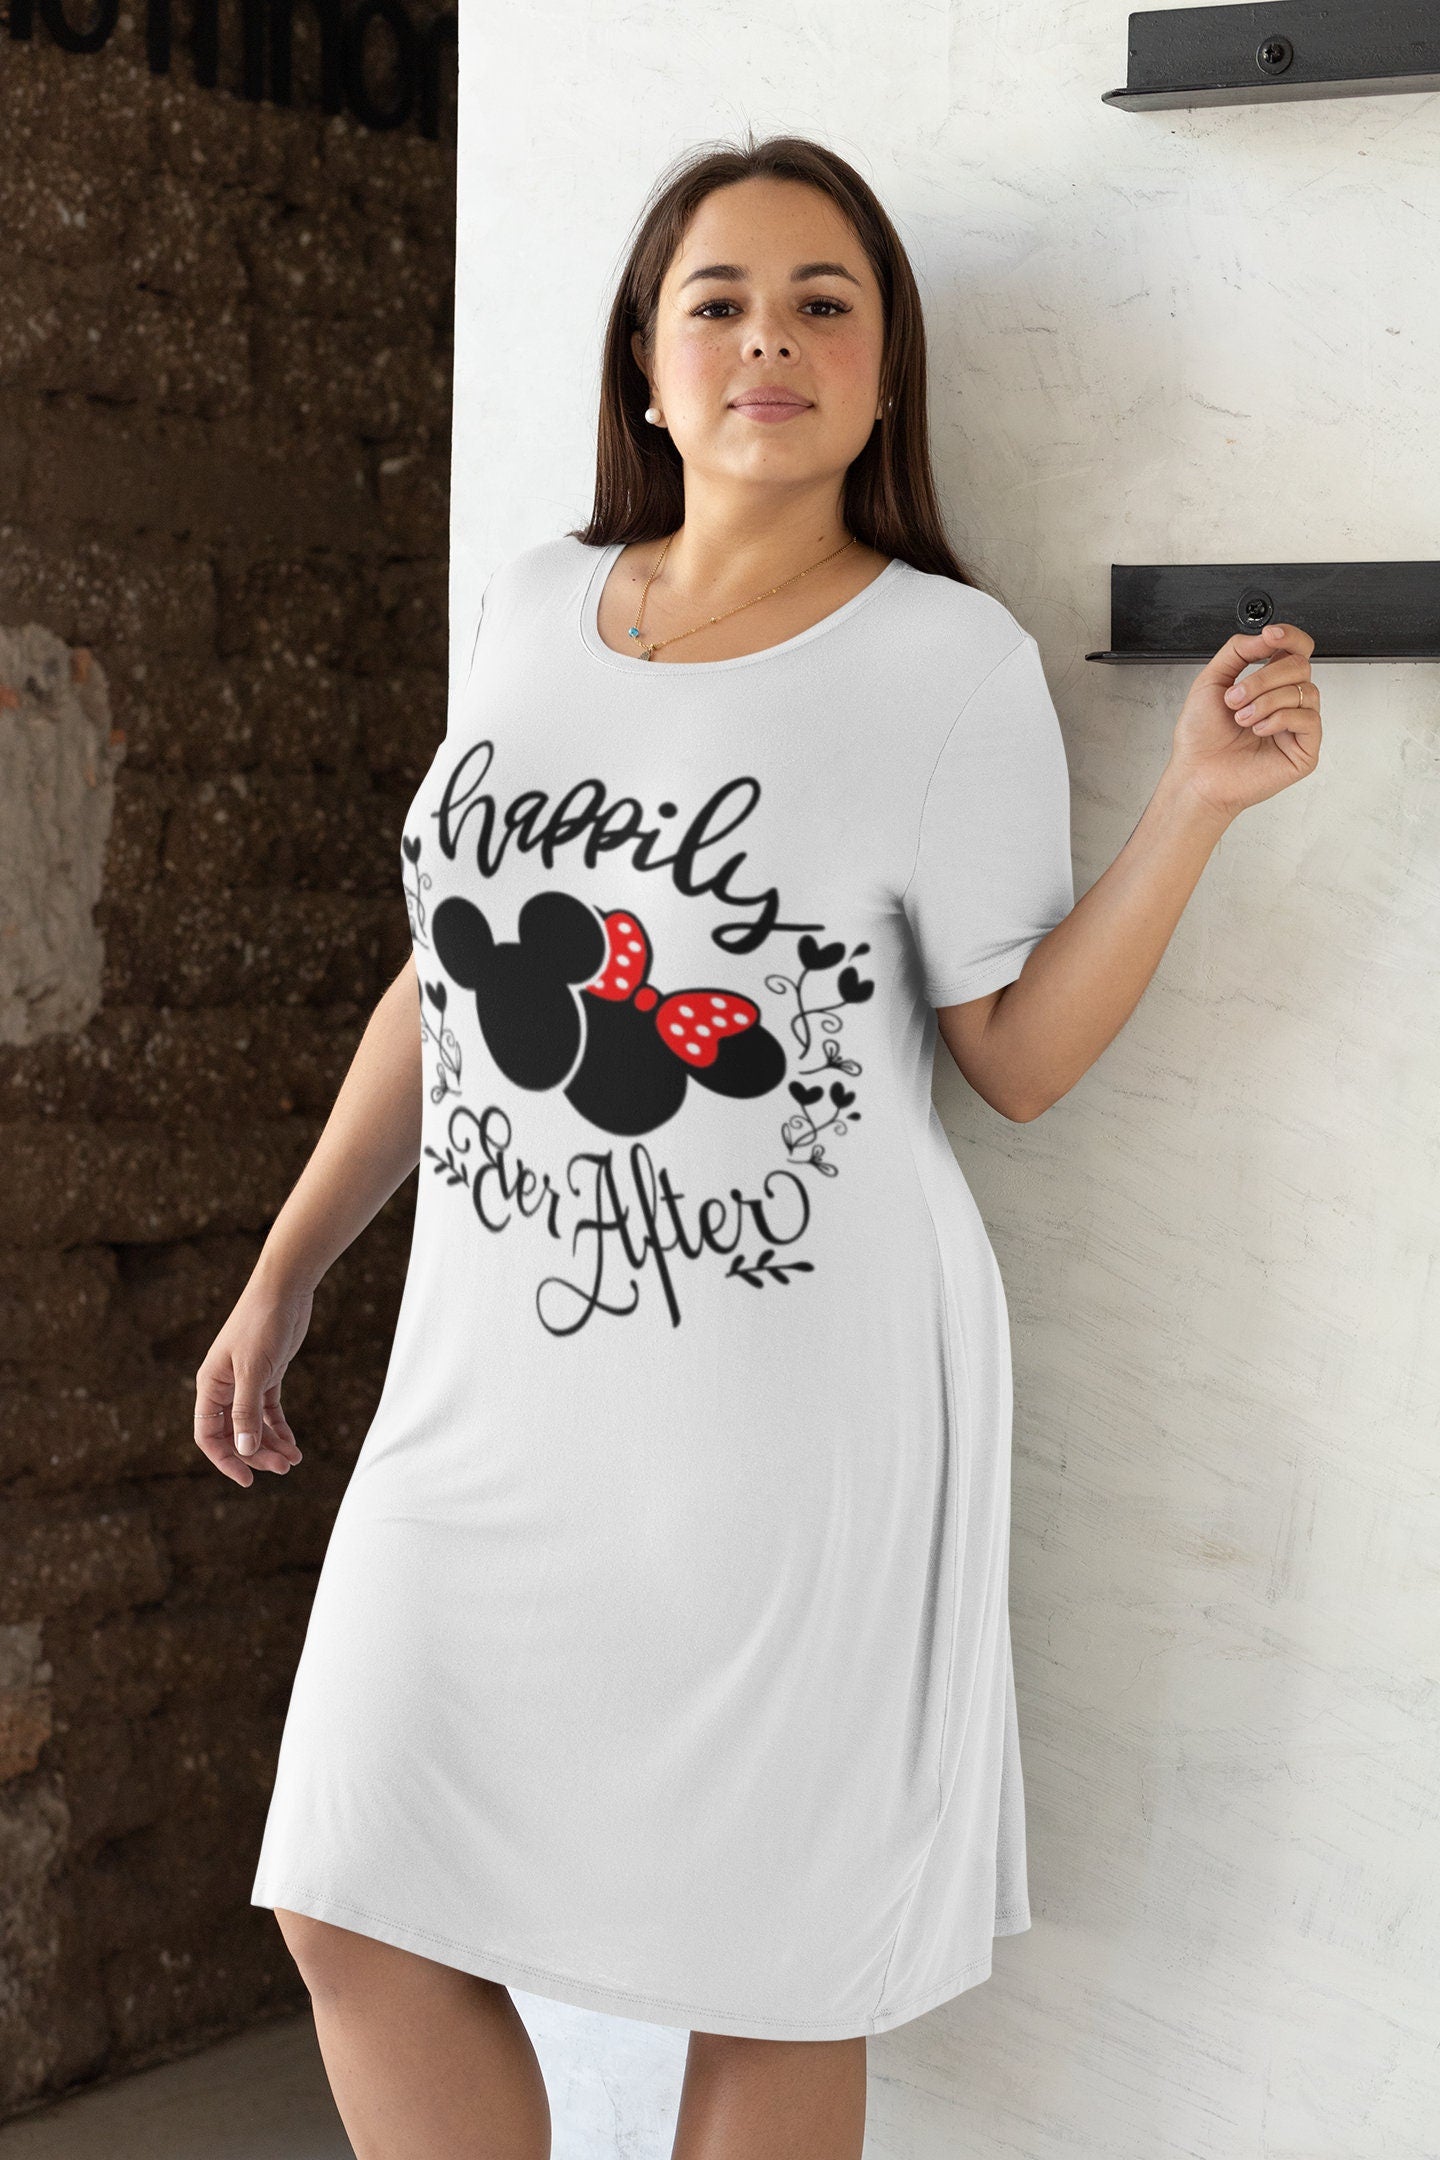 Happily Ever After T-Shirt Dress, Newlywed T-Shirt Dress, Honeymoon T-Shirt Dress, Anniversary Dress, Wedding Party Dress, Wedding Gift